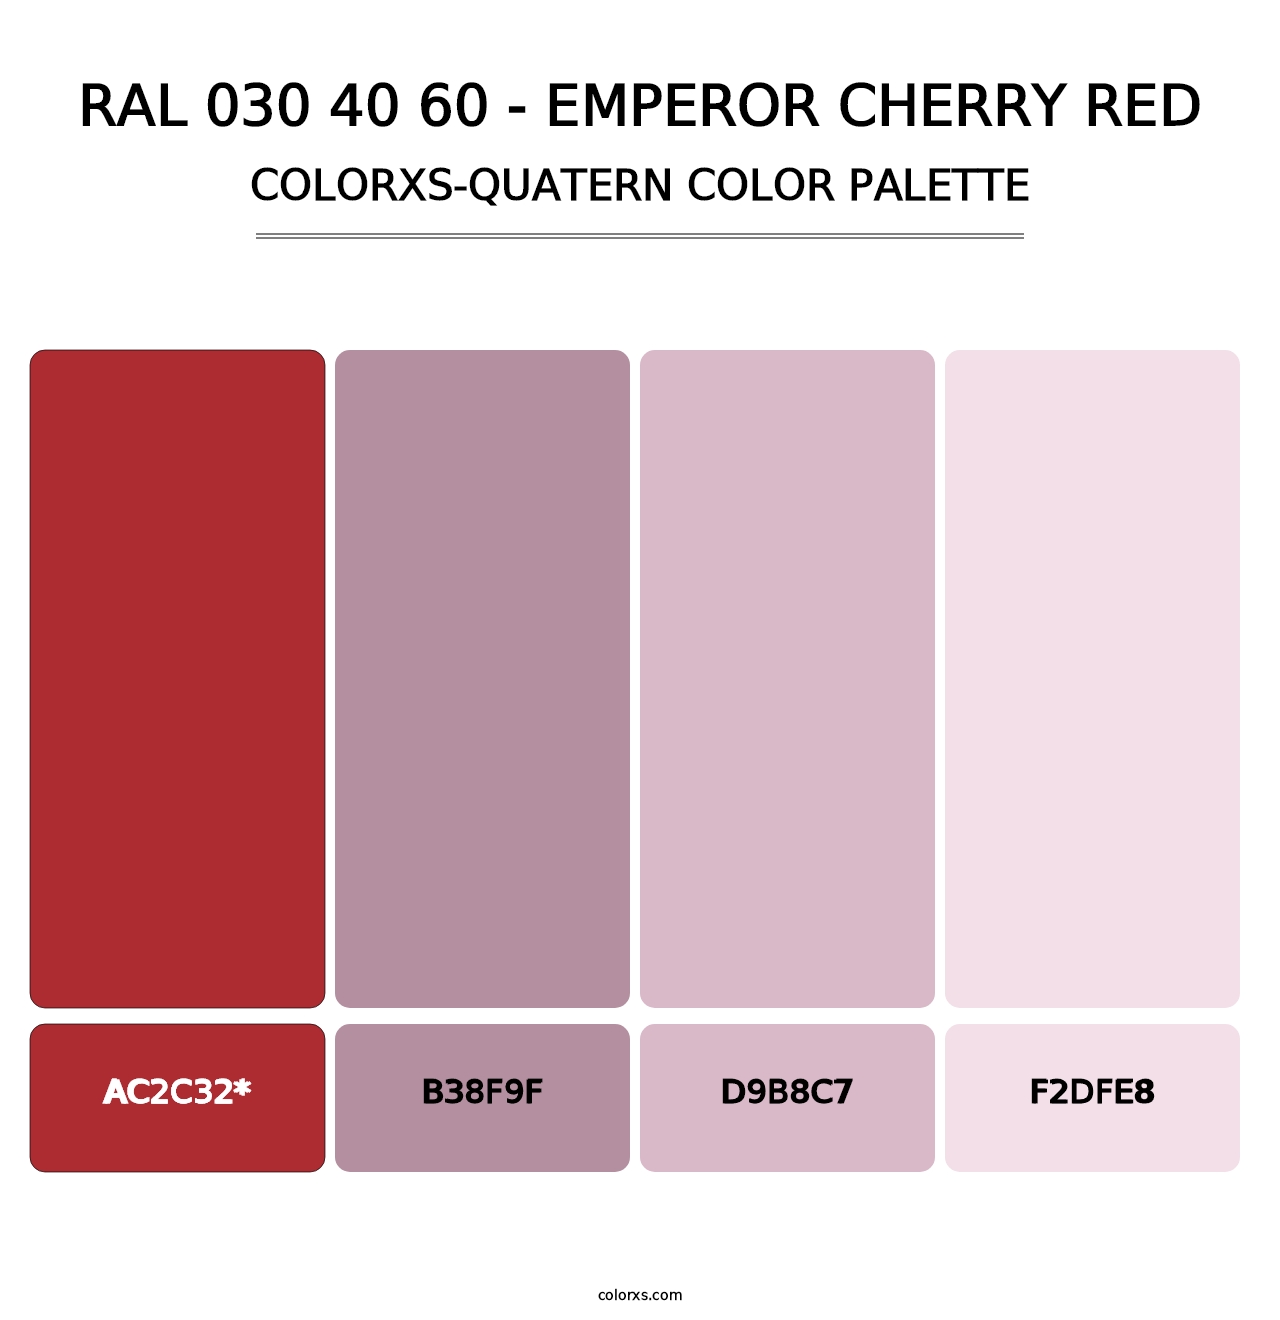 RAL 030 40 60 - Emperor Cherry Red - Colorxs Quatern Palette